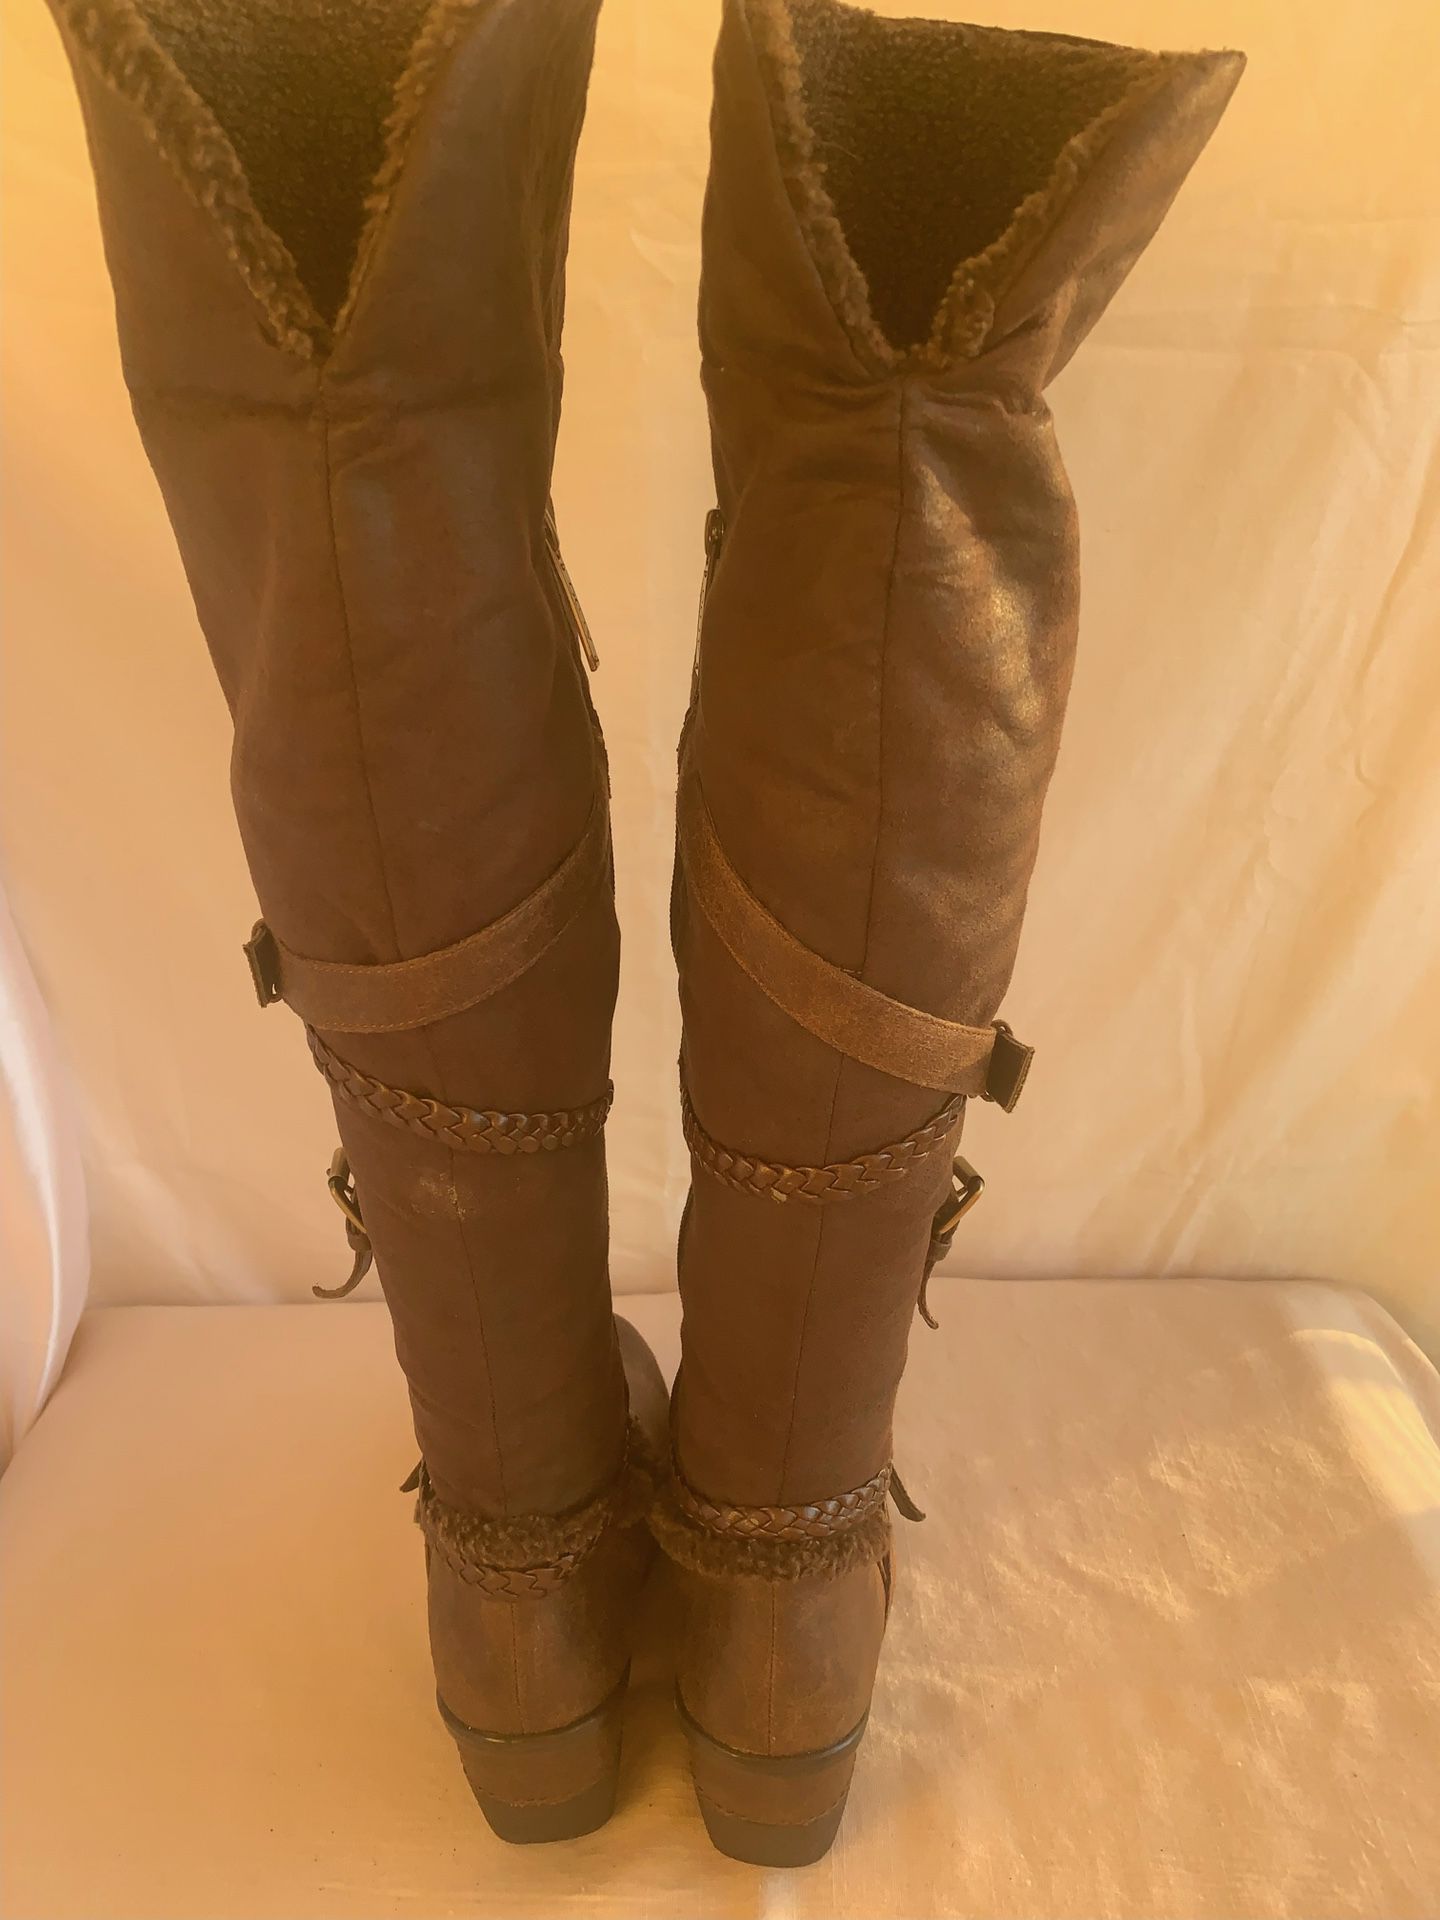 New Aldo Zipper brown suede/ leather fur inside boots zip-up style calf-high boots size EUR 38/USA 7.5 women’s